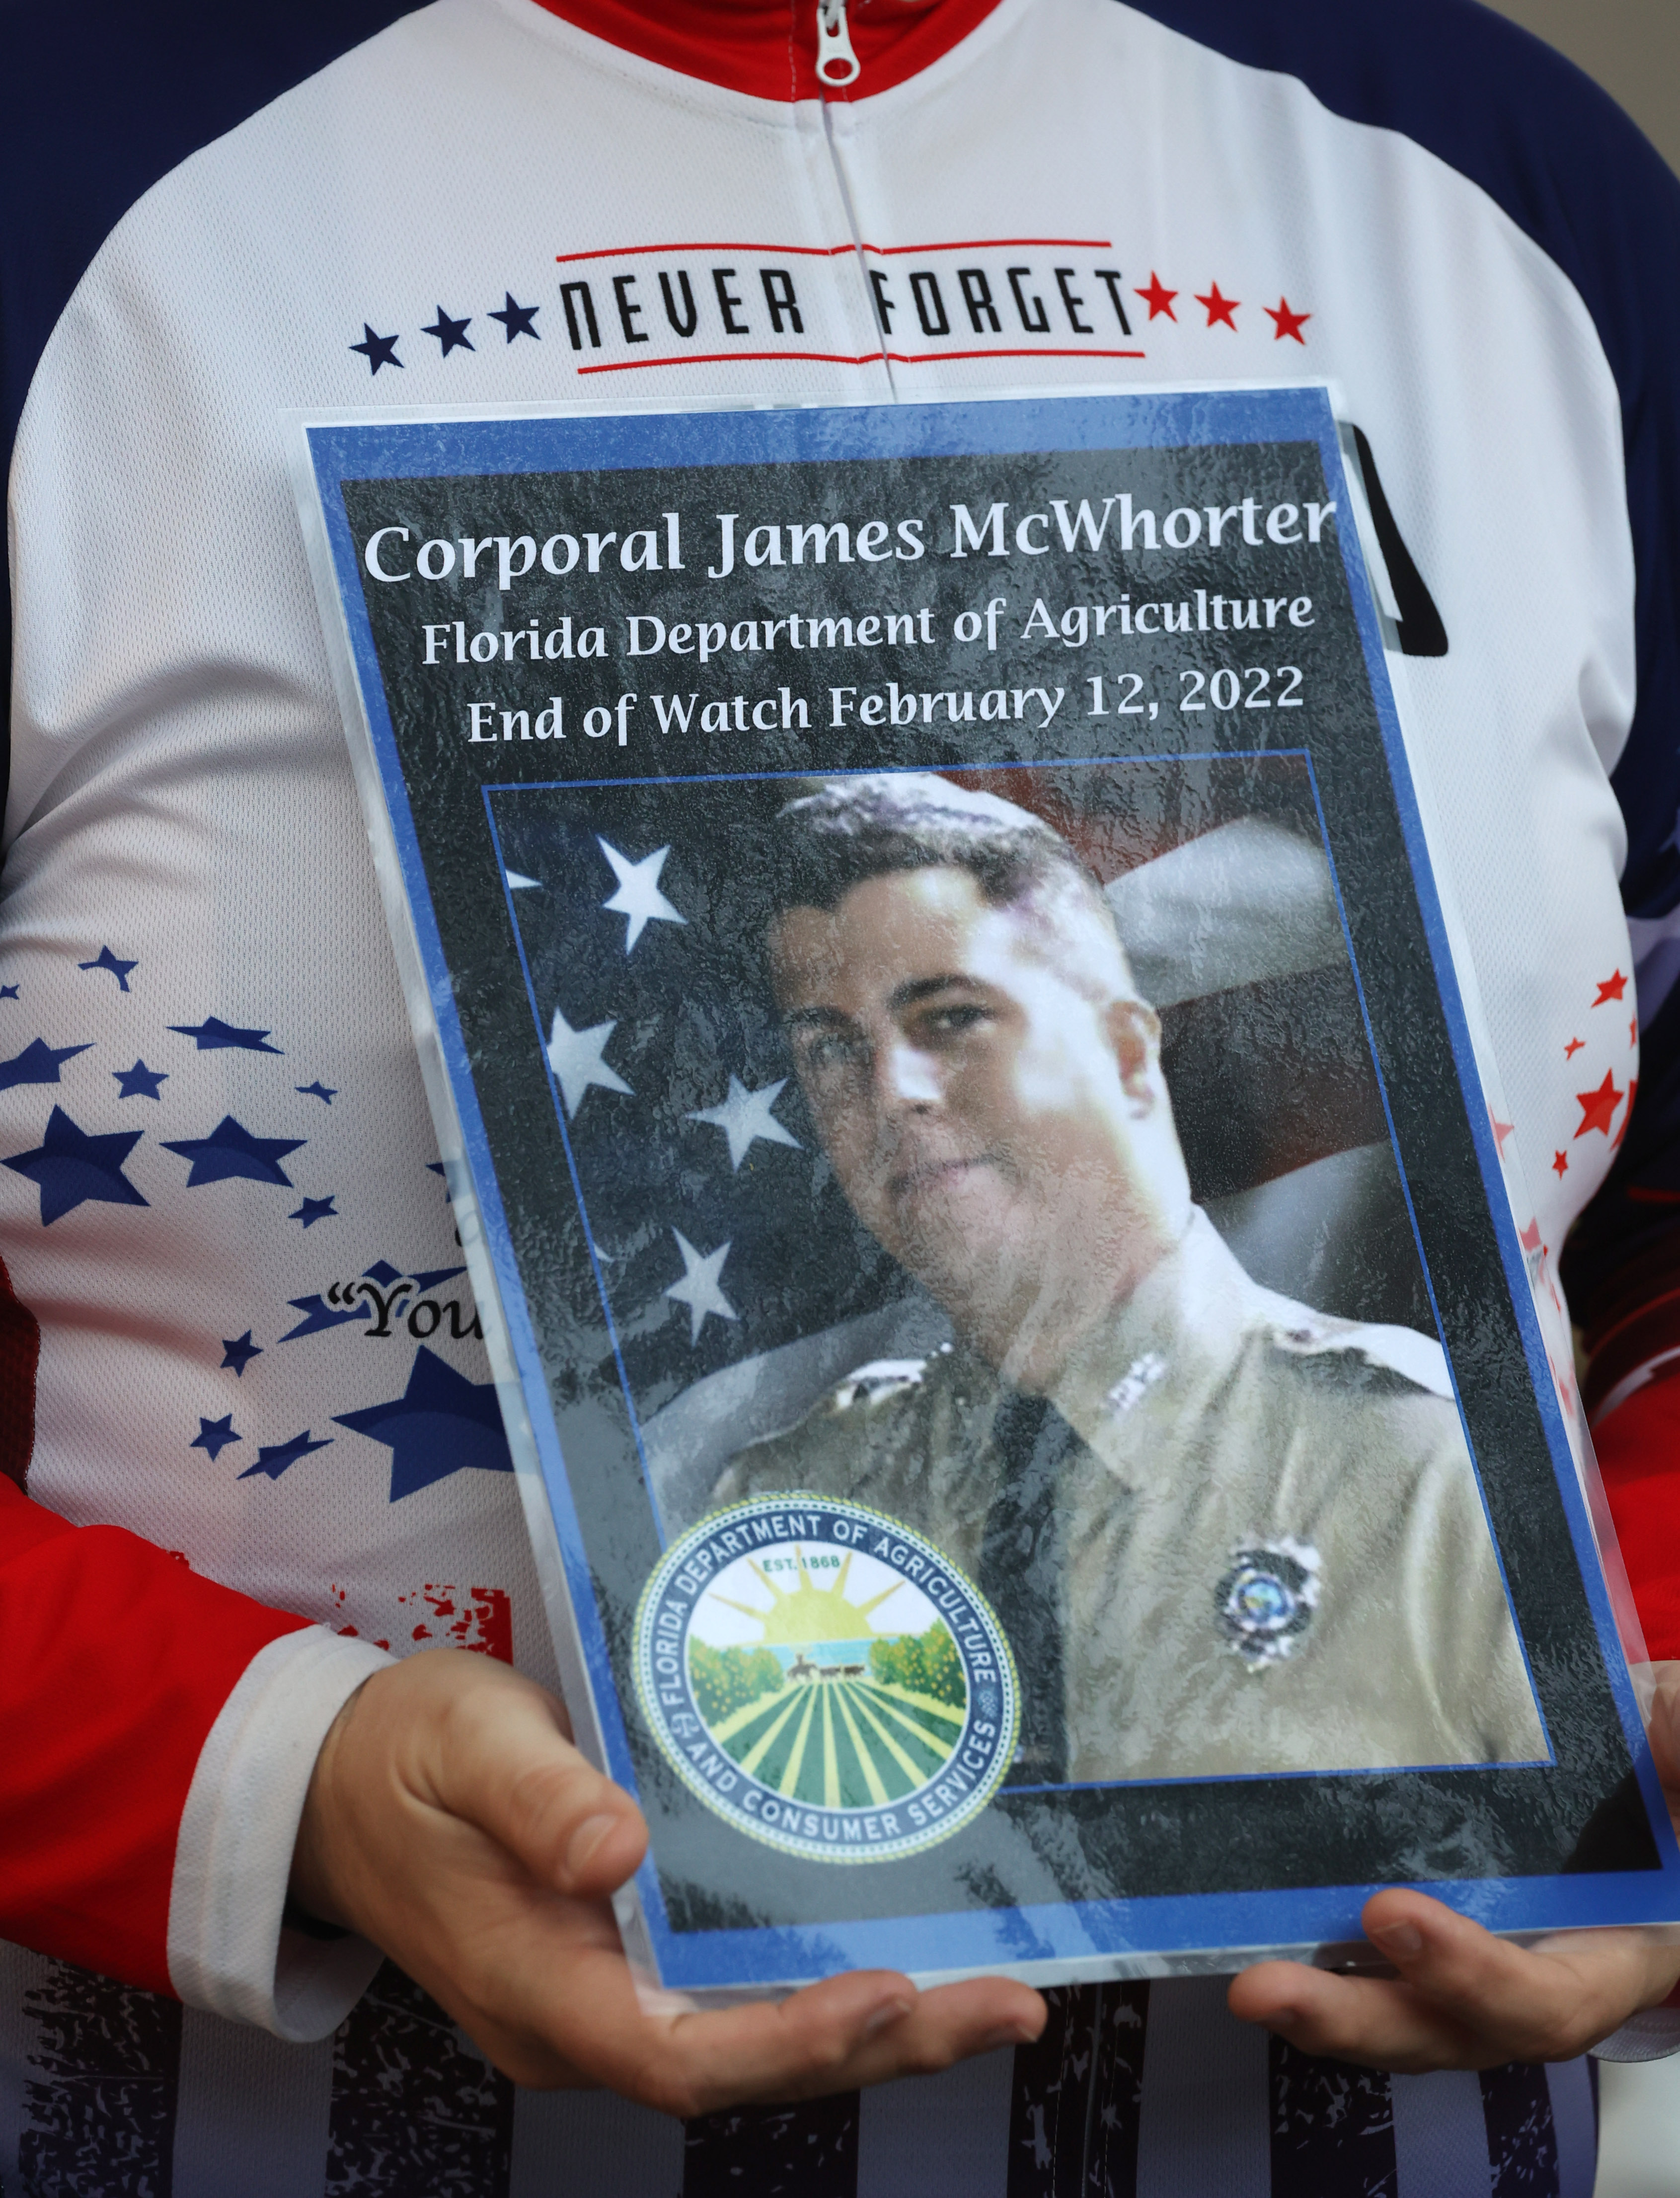 Remembrance poster for FL Department of Agriculture Corporal James McWhorter, before the Brotherhood Ride departs the Elks Lodge 1079, on their way to Cocoa Beach, on Tuesday, October 31, 2023. The ride is dedicated to the 28 Florida Fallen First Responders who died in the line of duty in 2022 while protecting their communities. They started in Naples and will end their 9-day ride through Florida in Miami.(Ricardo Ramirez Buxeda/ Orlando Sentinel)